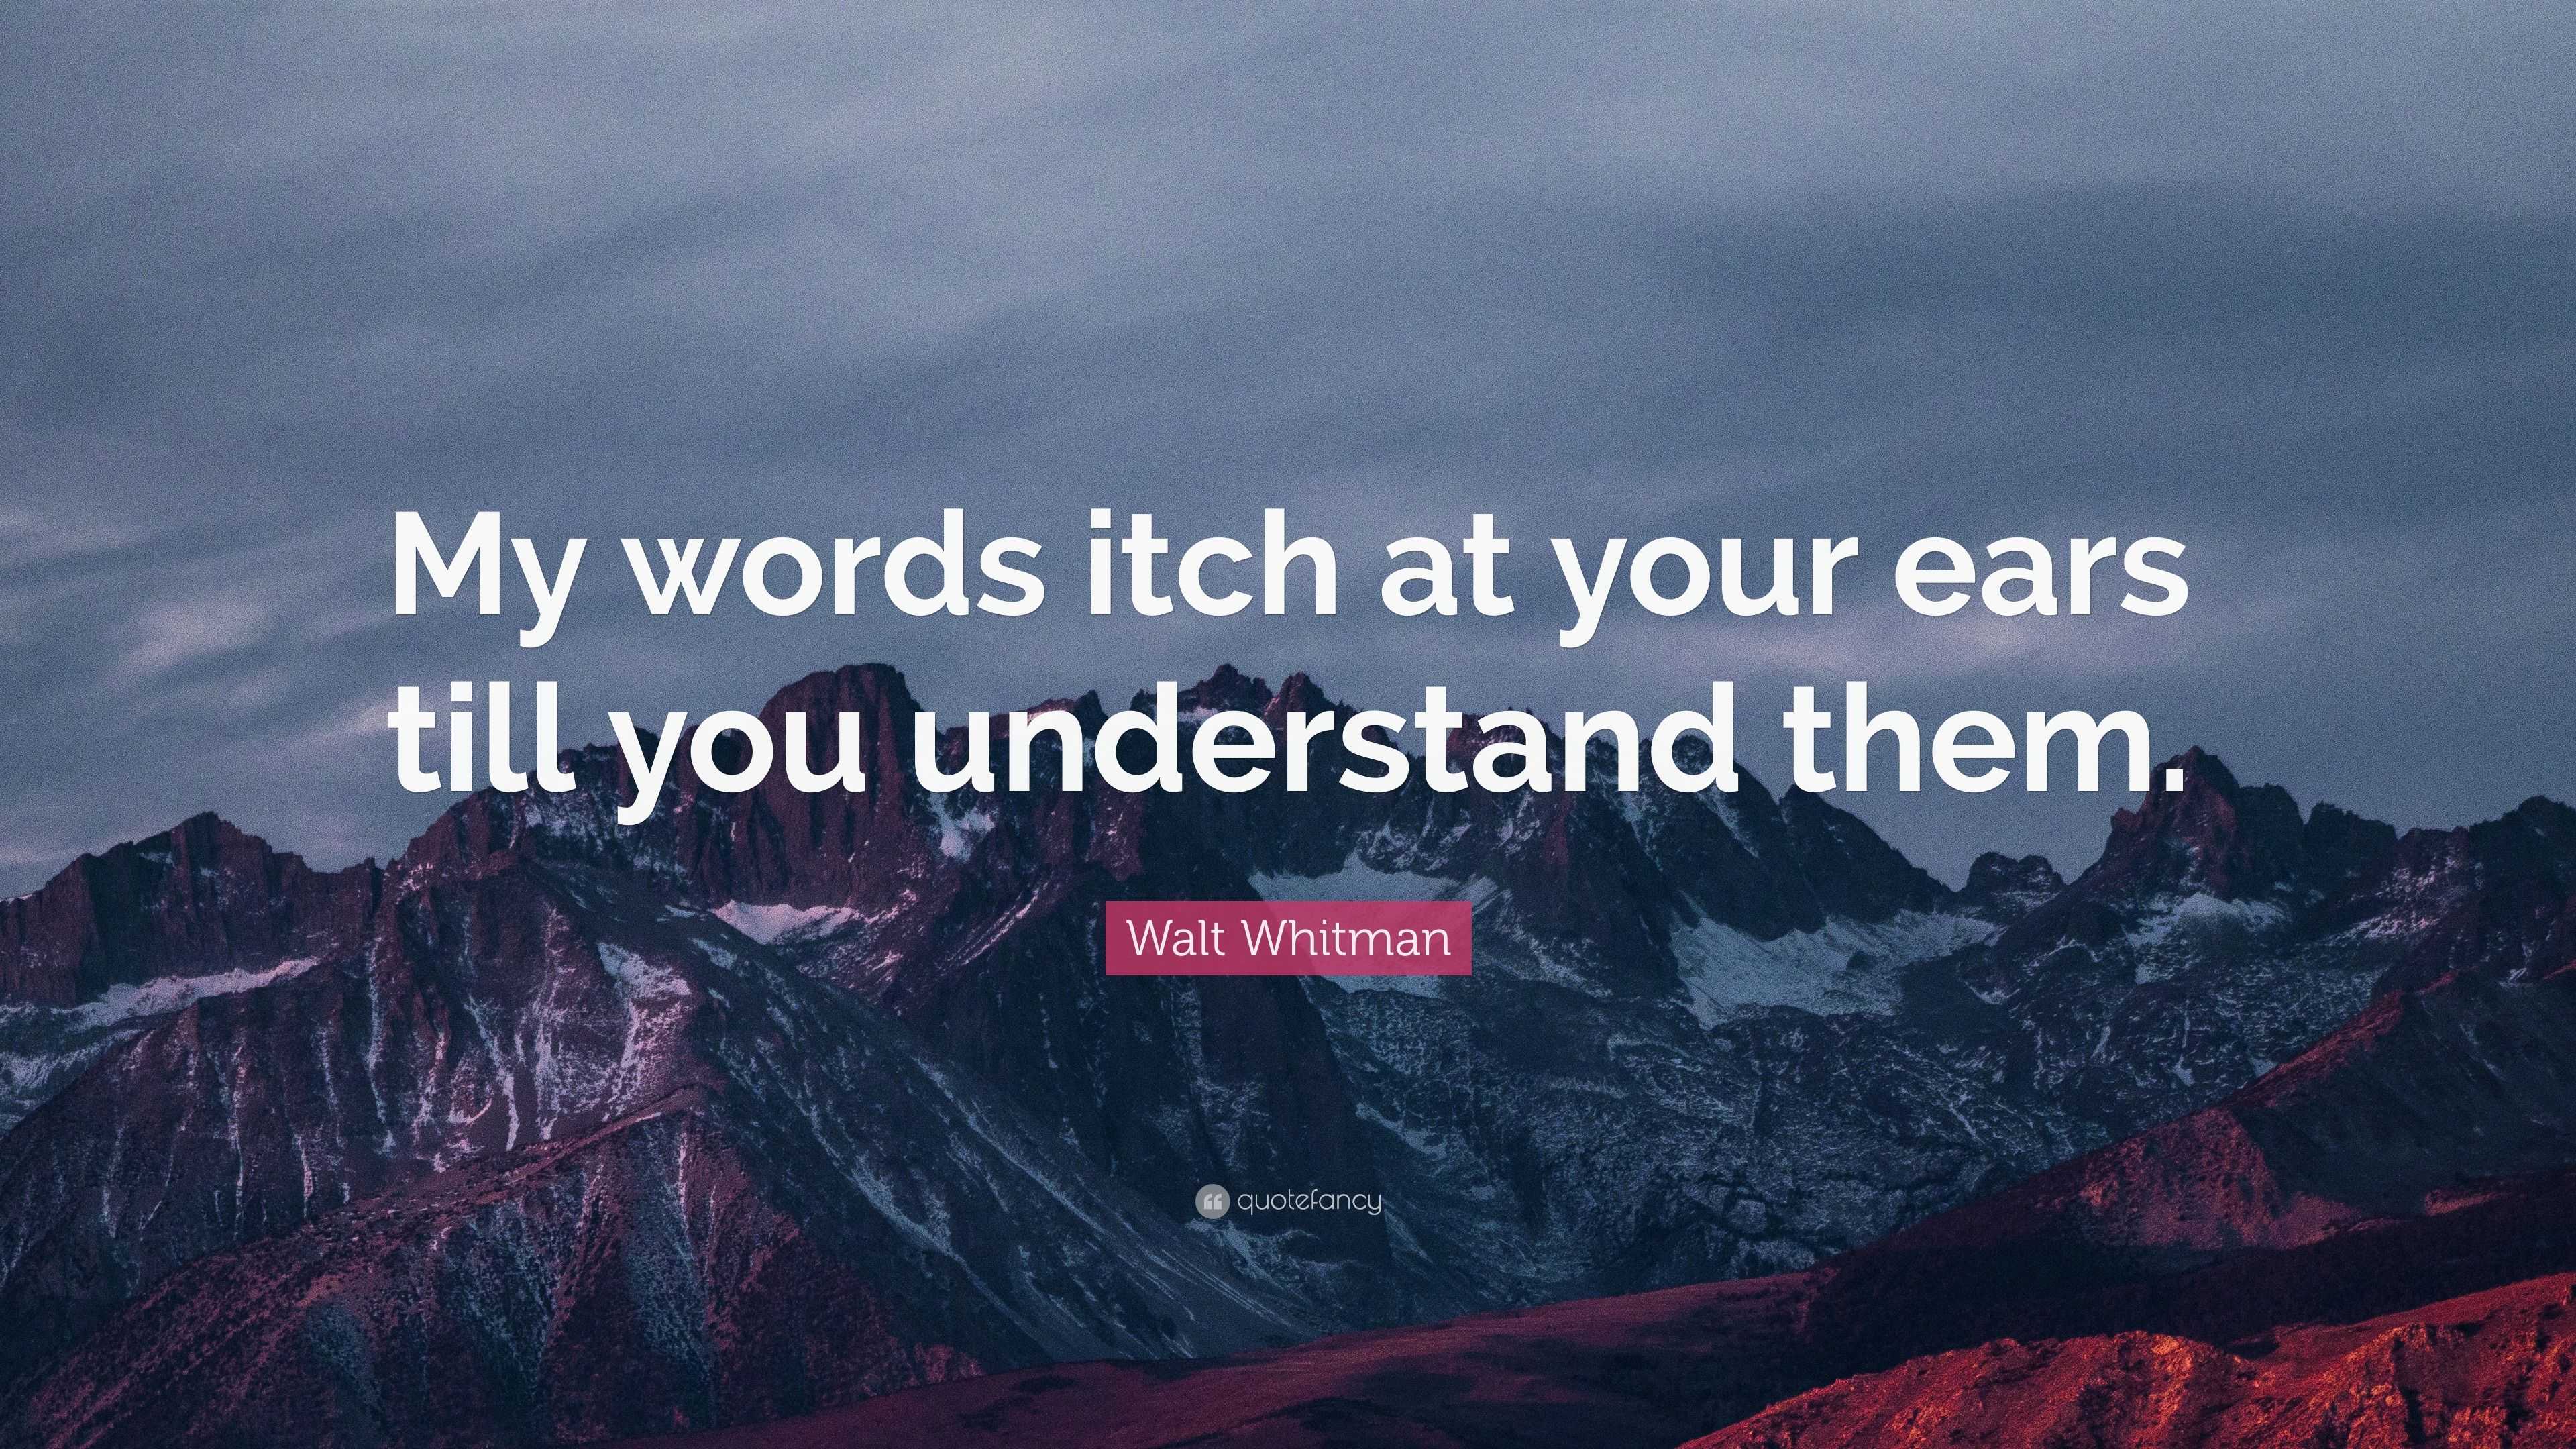 Walt Whitman Quote: “My words itch at your ears till you understand them.”